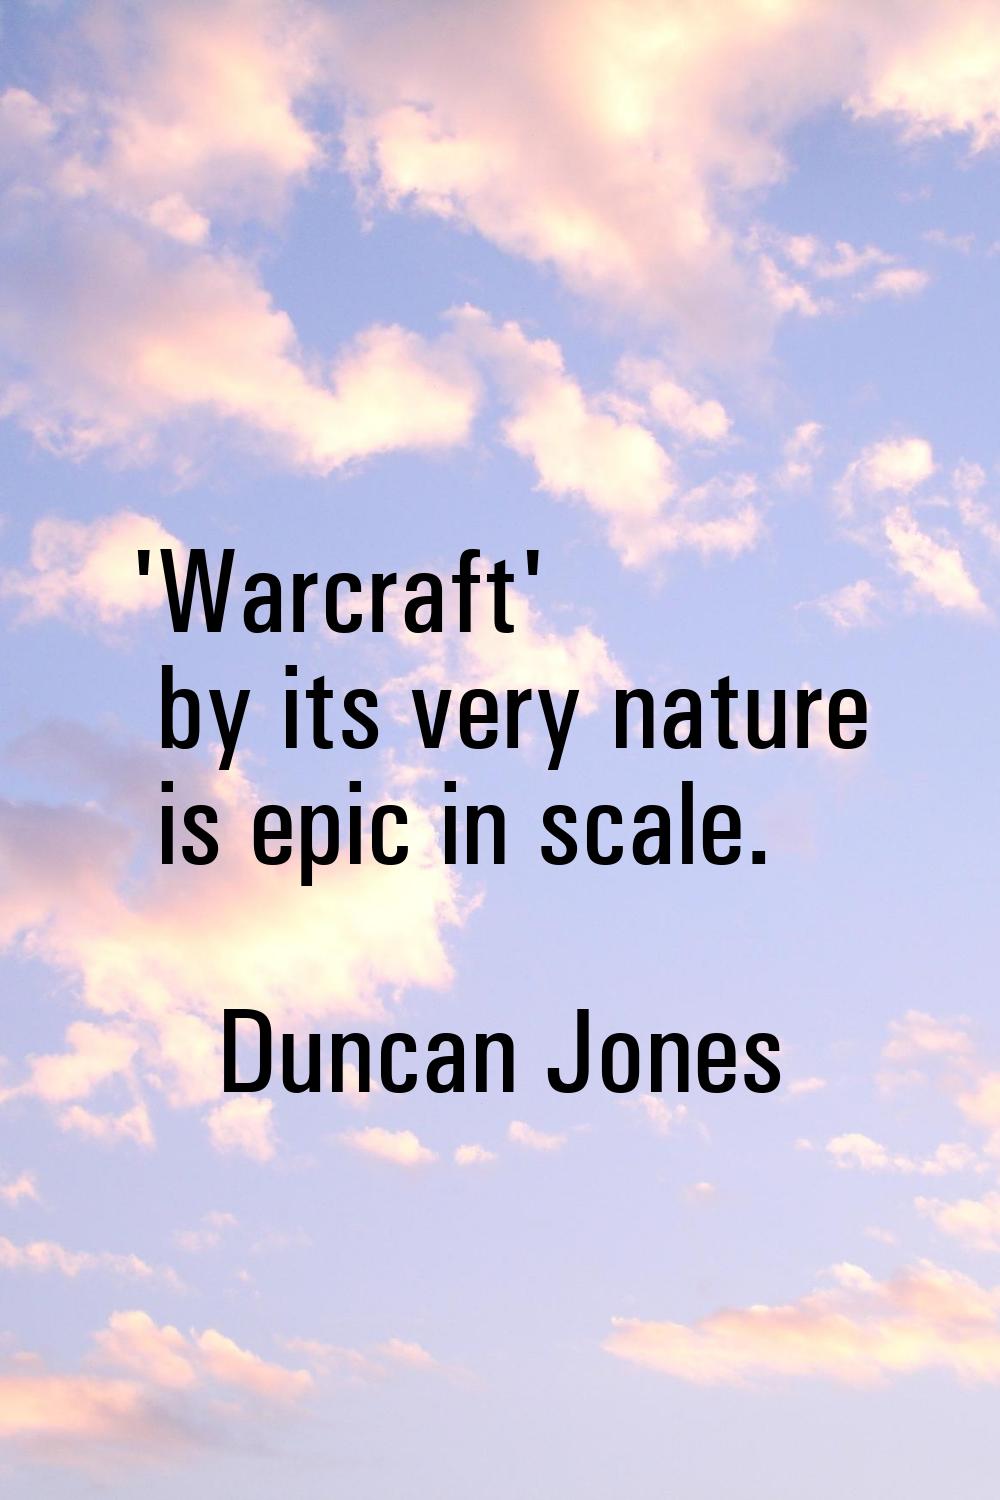 'Warcraft' by its very nature is epic in scale.